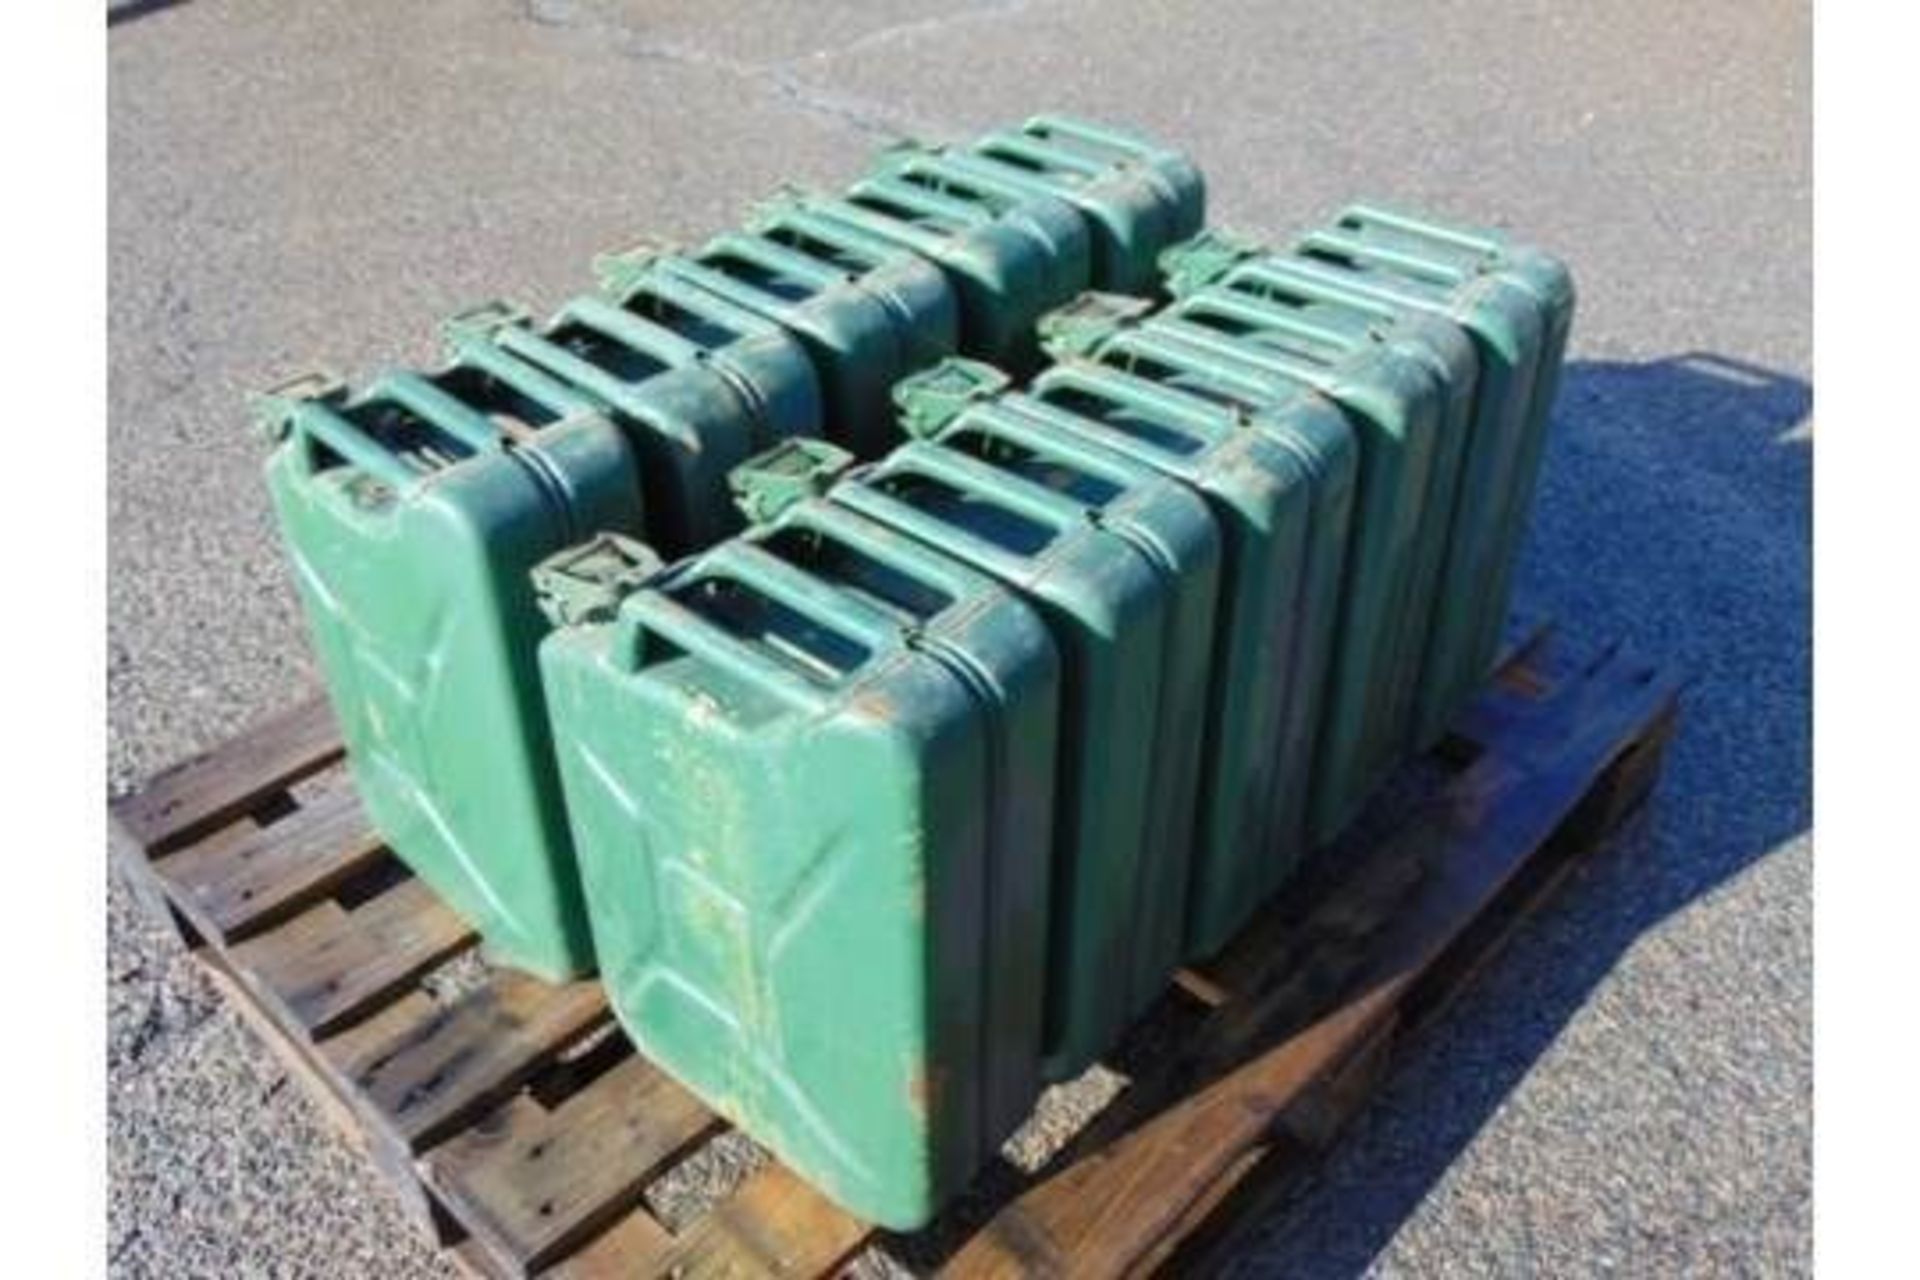 You are bidding on 20 x (2x10) Unissued NATO Issue 20L Jerry Cans - Image 3 of 7